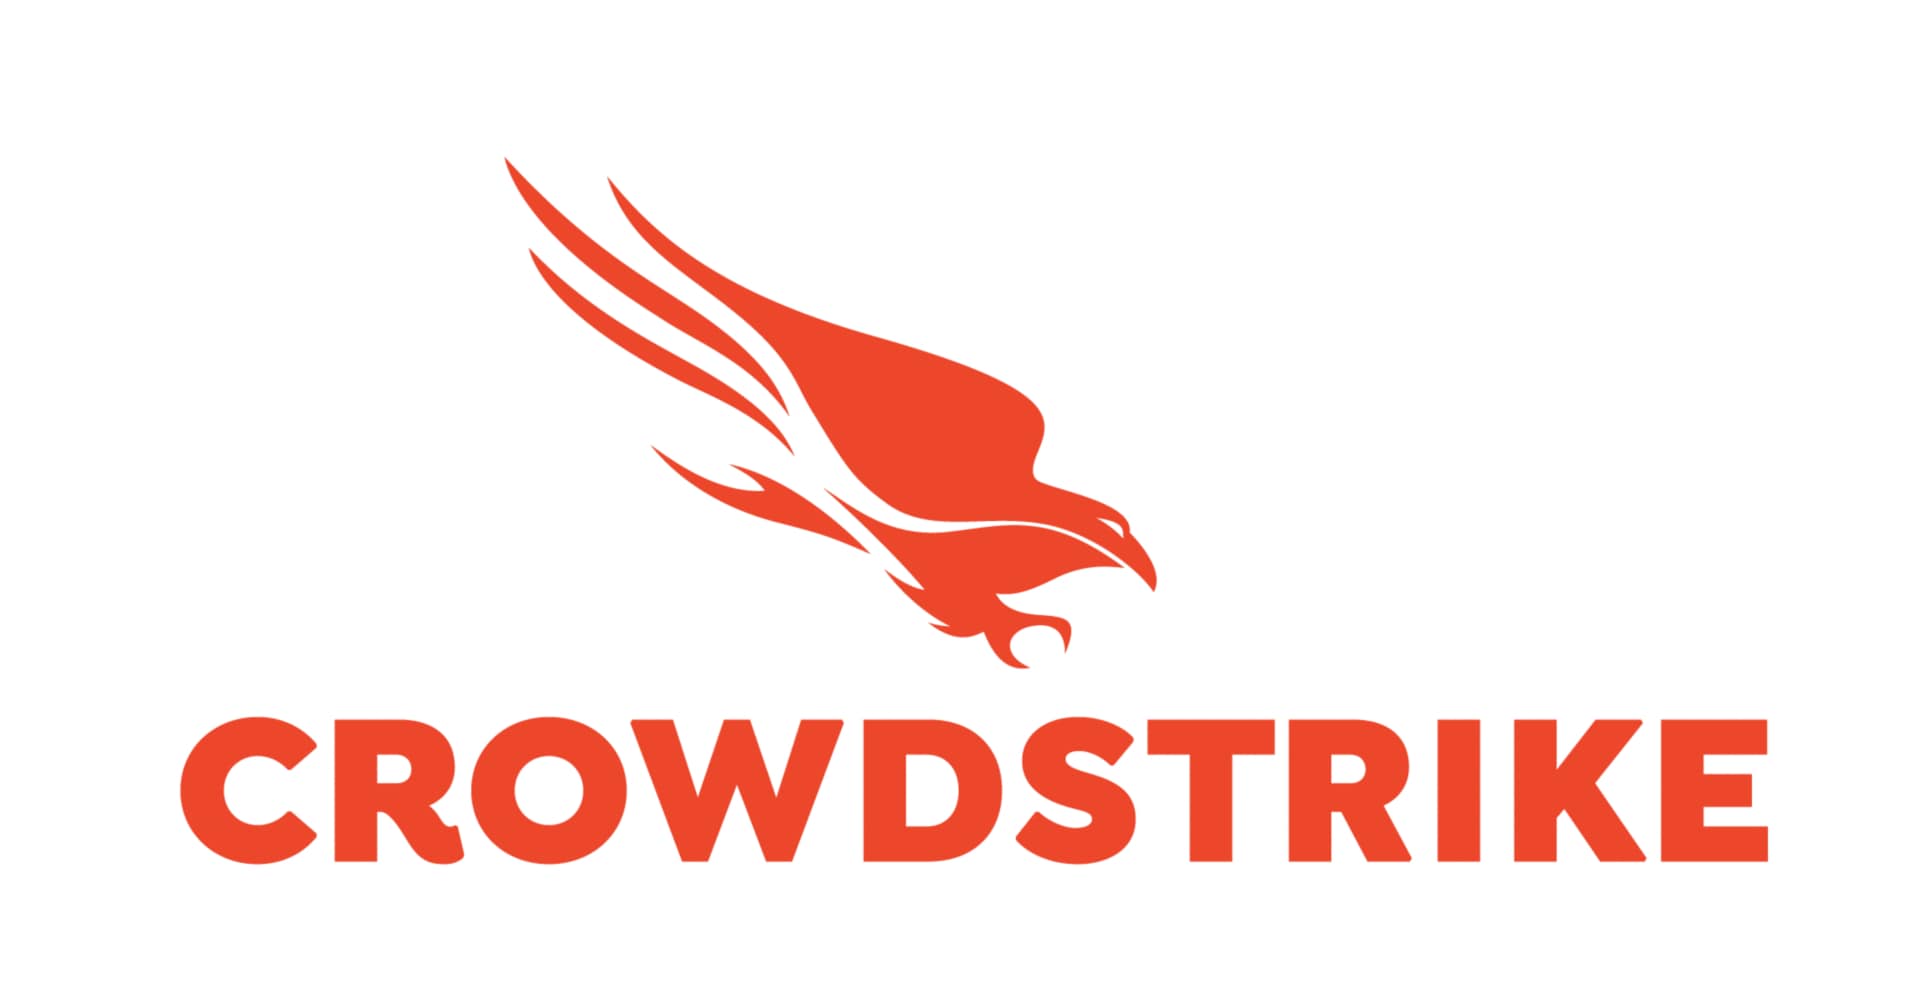 CrowdStrike 12-Month Falcon Cloud Workload Protection